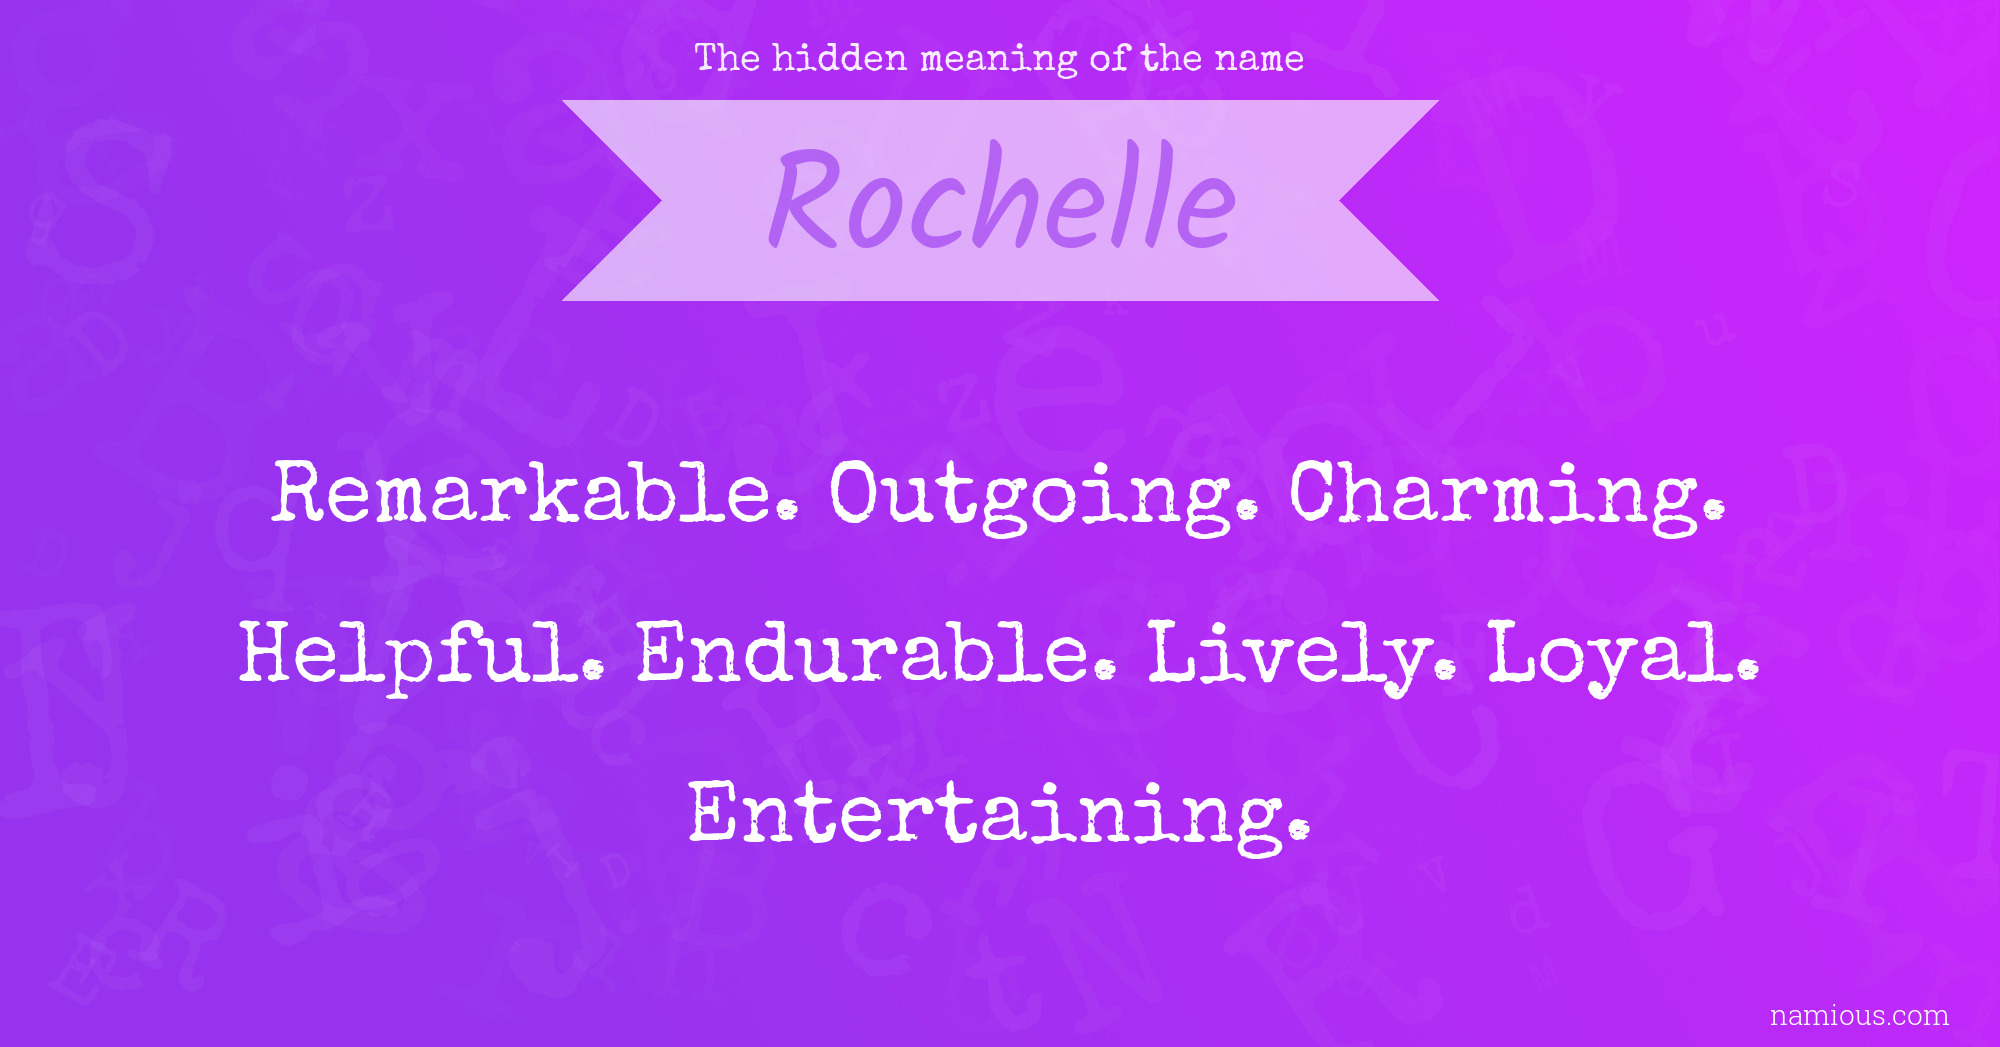 The hidden meaning of the name Rochelle